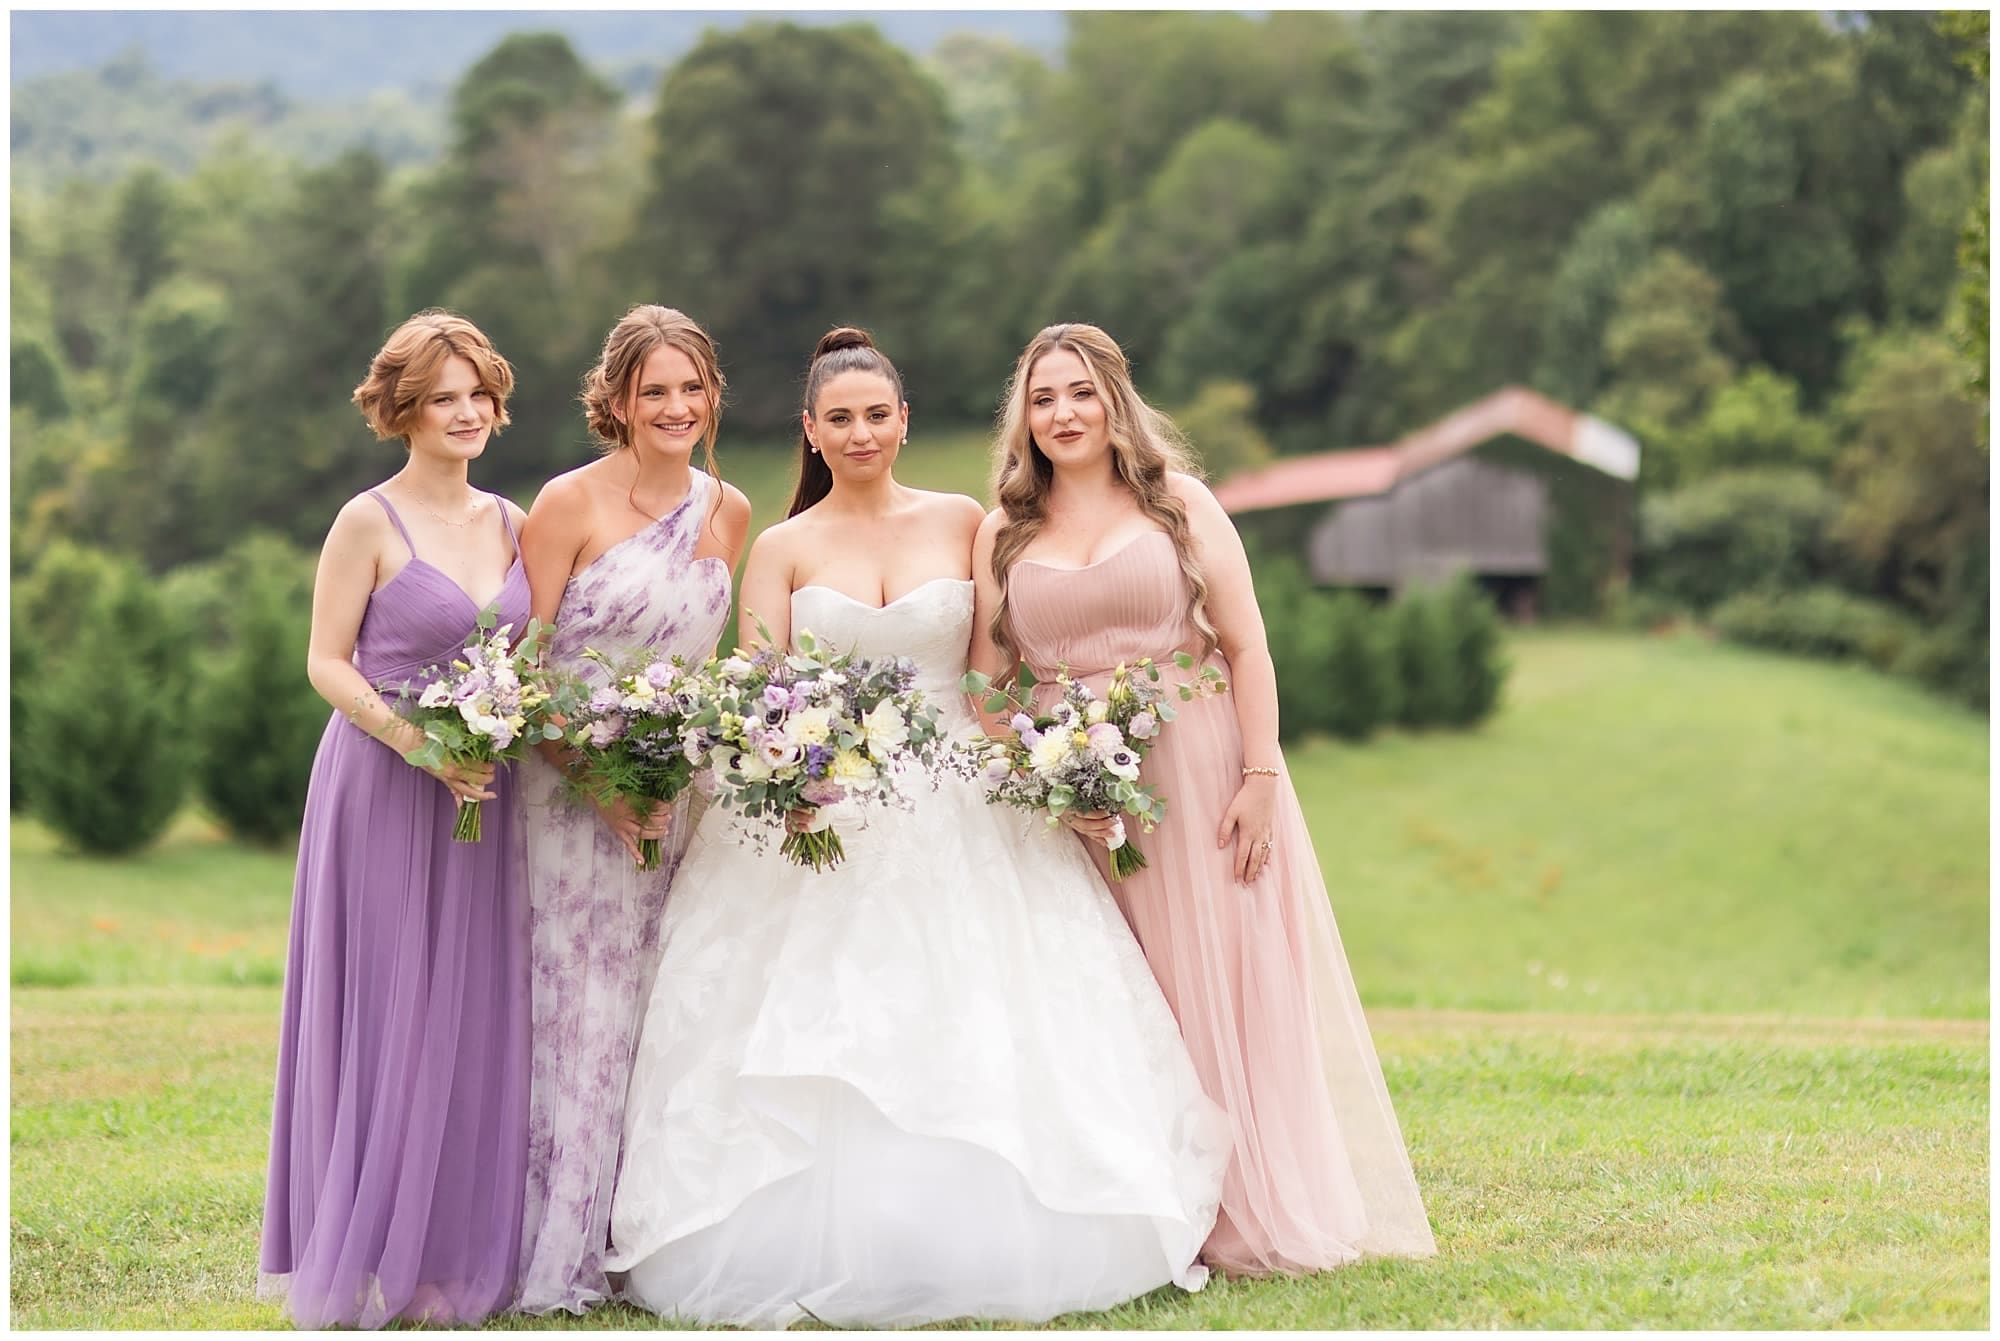 Bride and bridesmaids with mountain backgroud